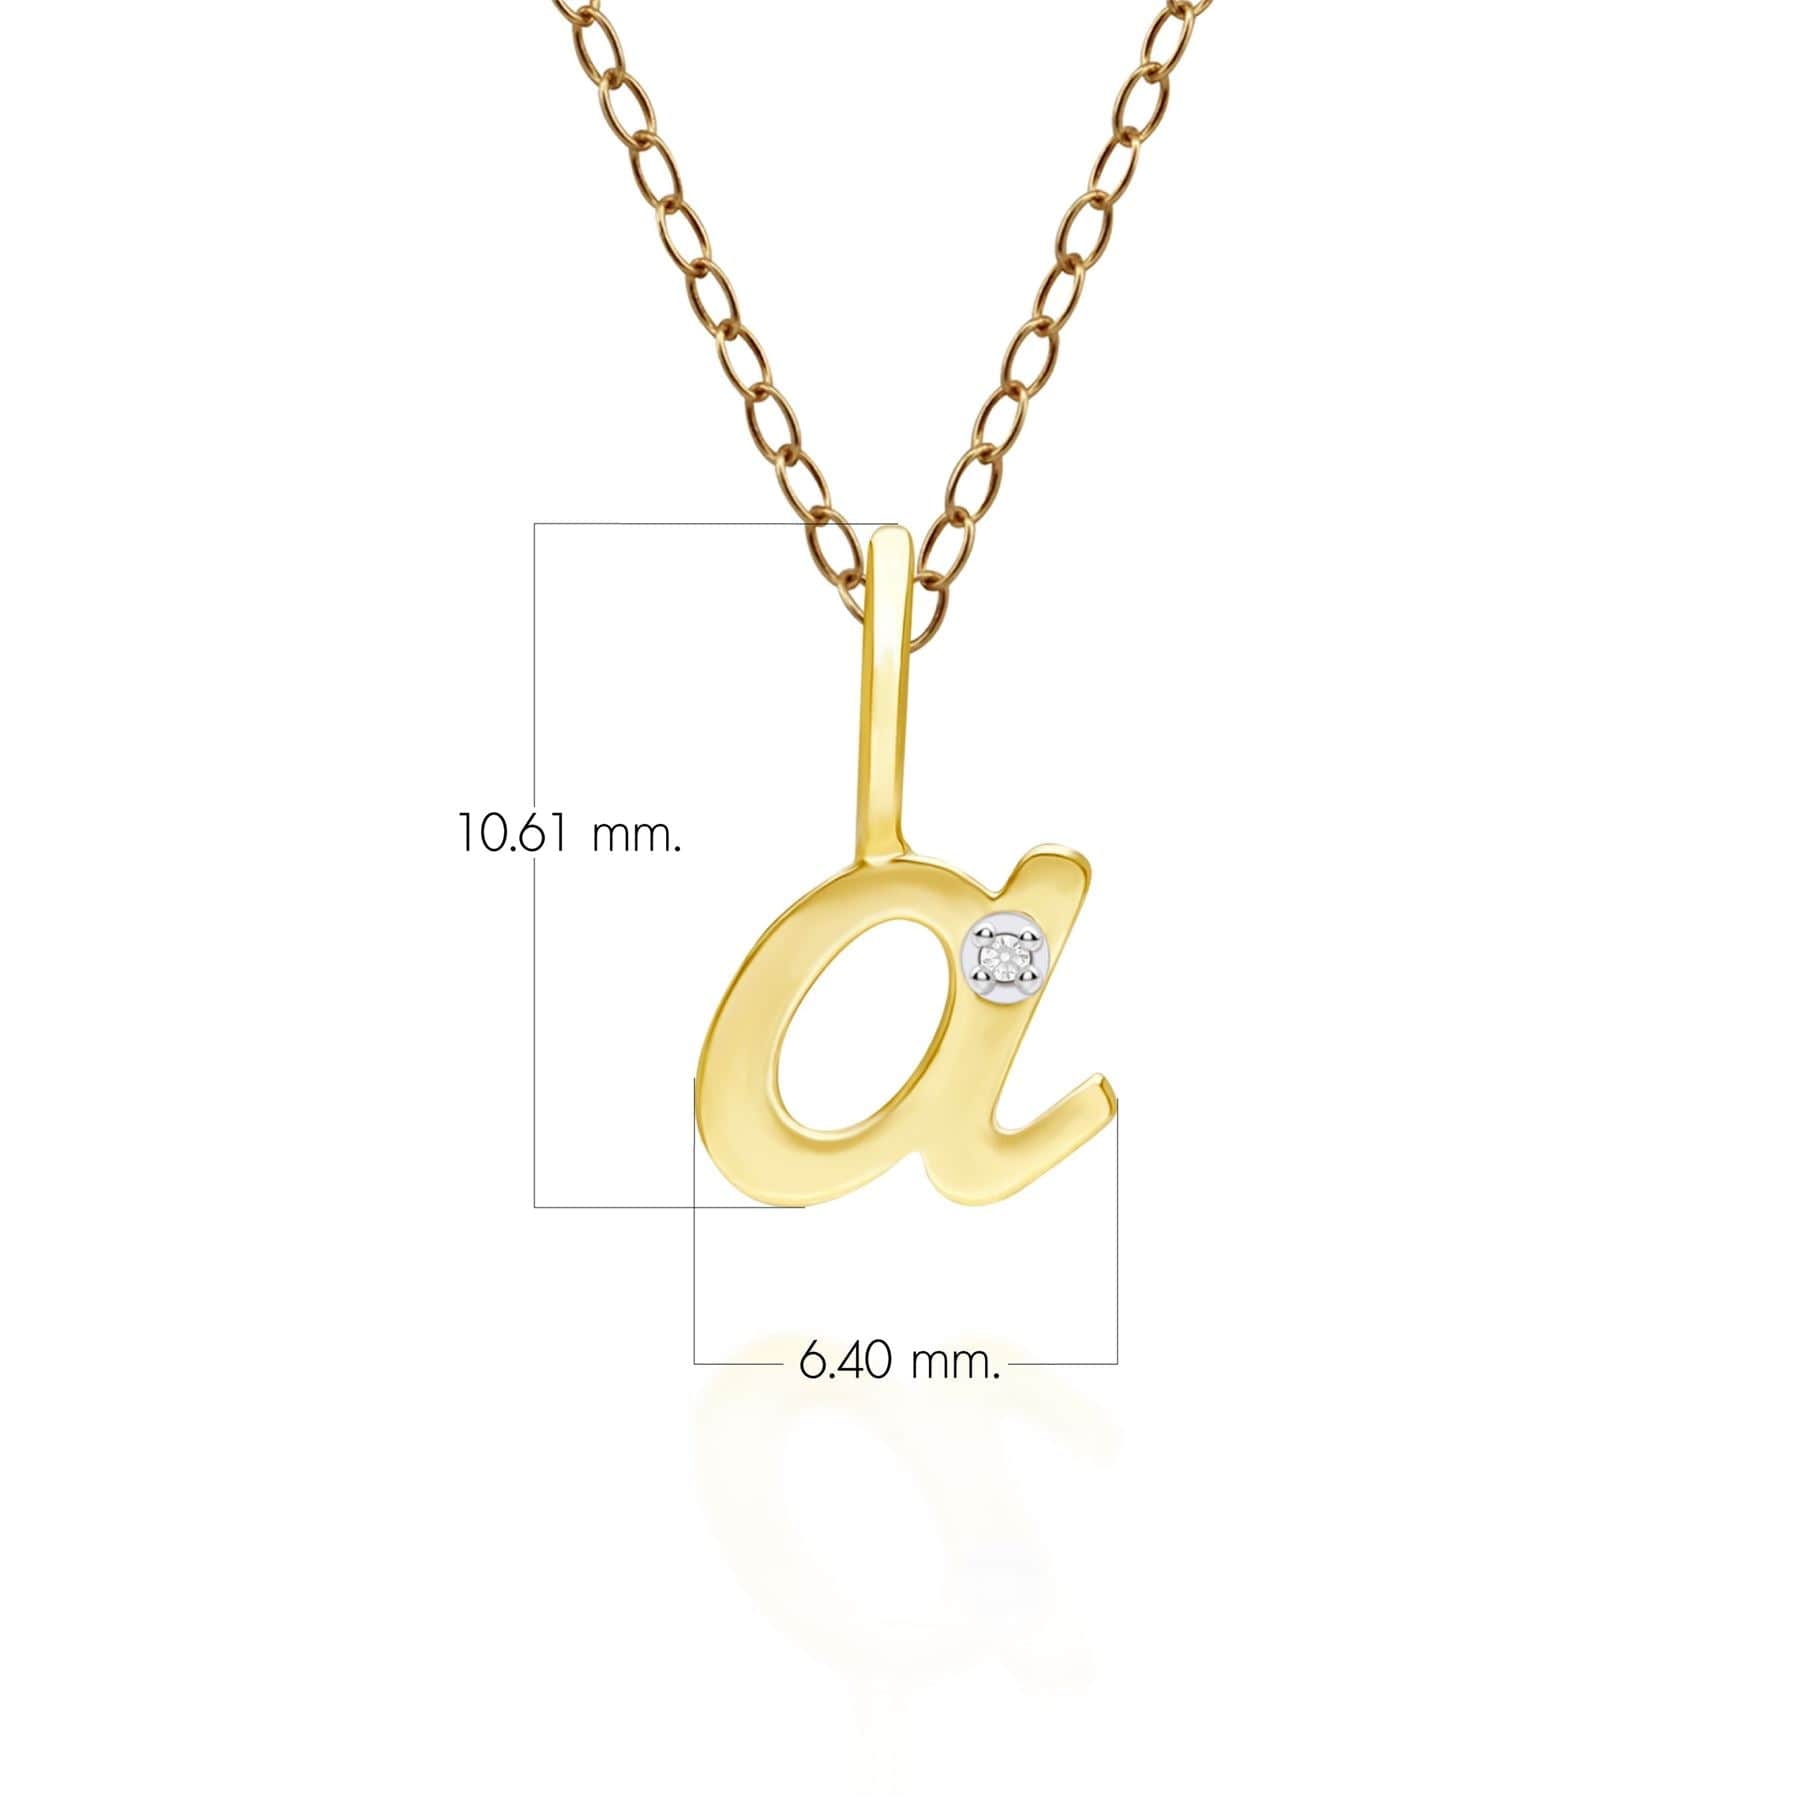 191P0772019 Alphabet Letter A Diamond pendant in 9ct Yellow Gold Dimensions